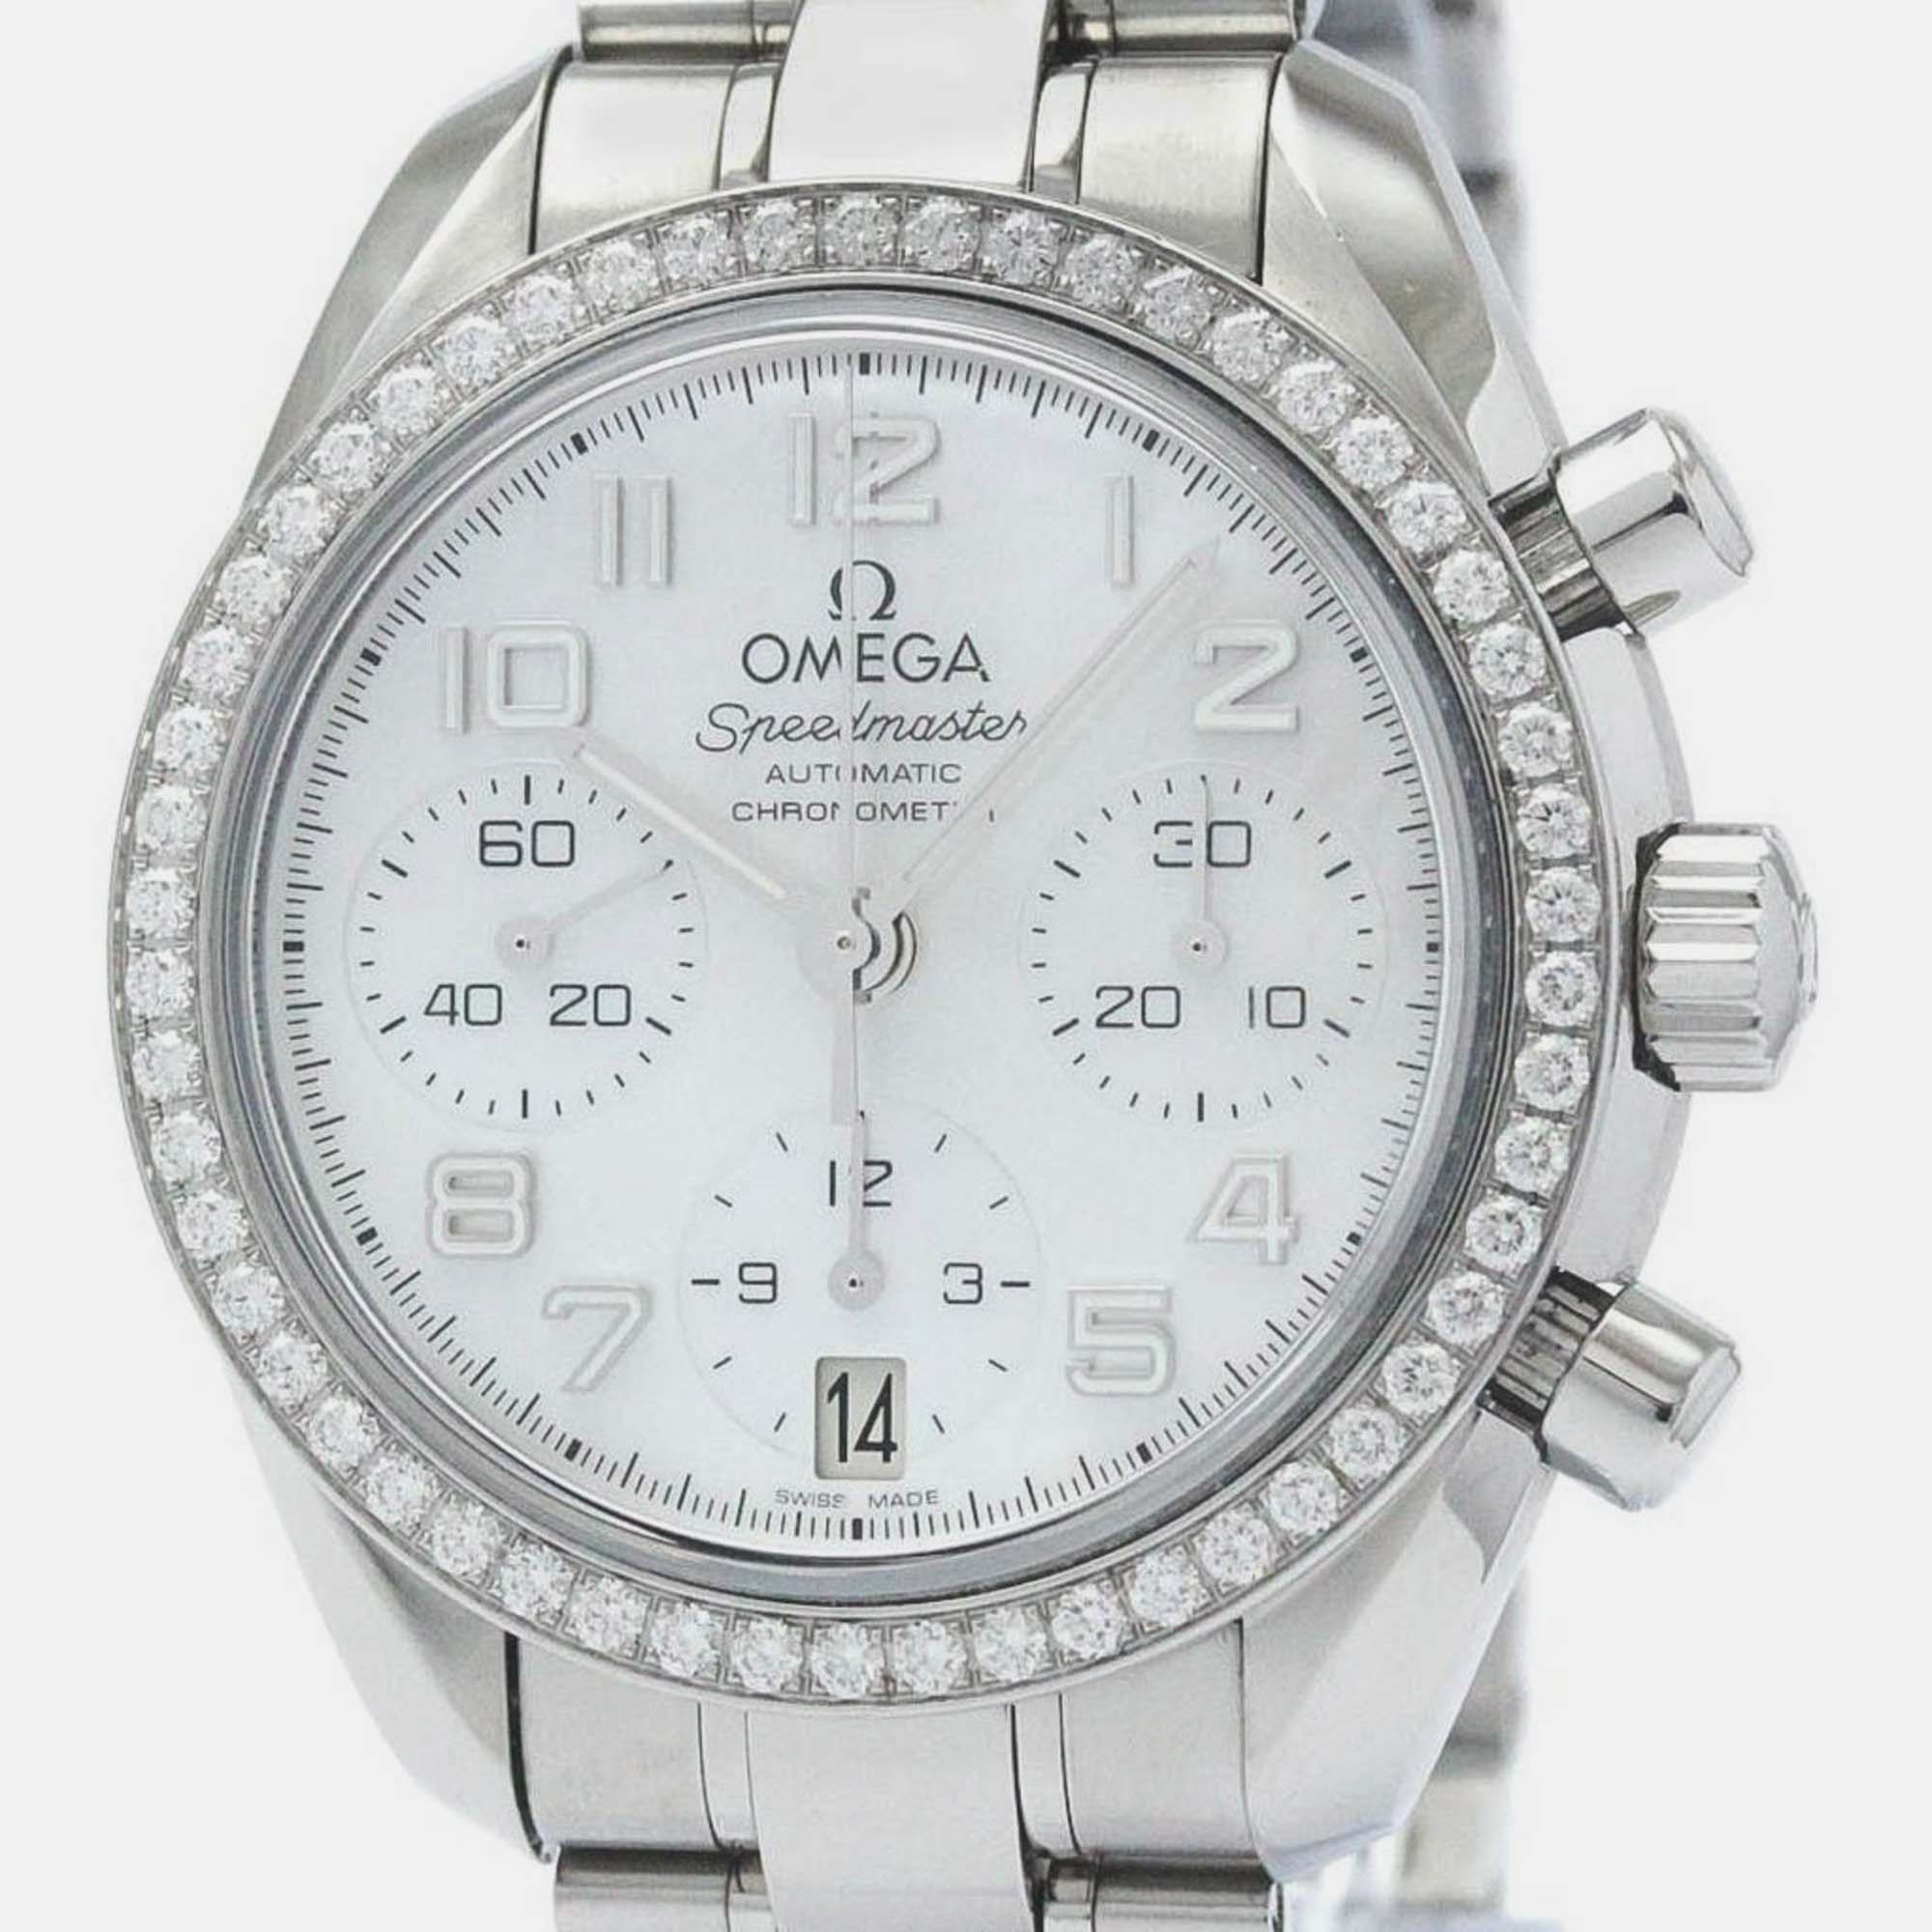 Omega white shell stainless steel speedmaster 324.15.38.40.05.001 automatic men's wristwatch 38 mm